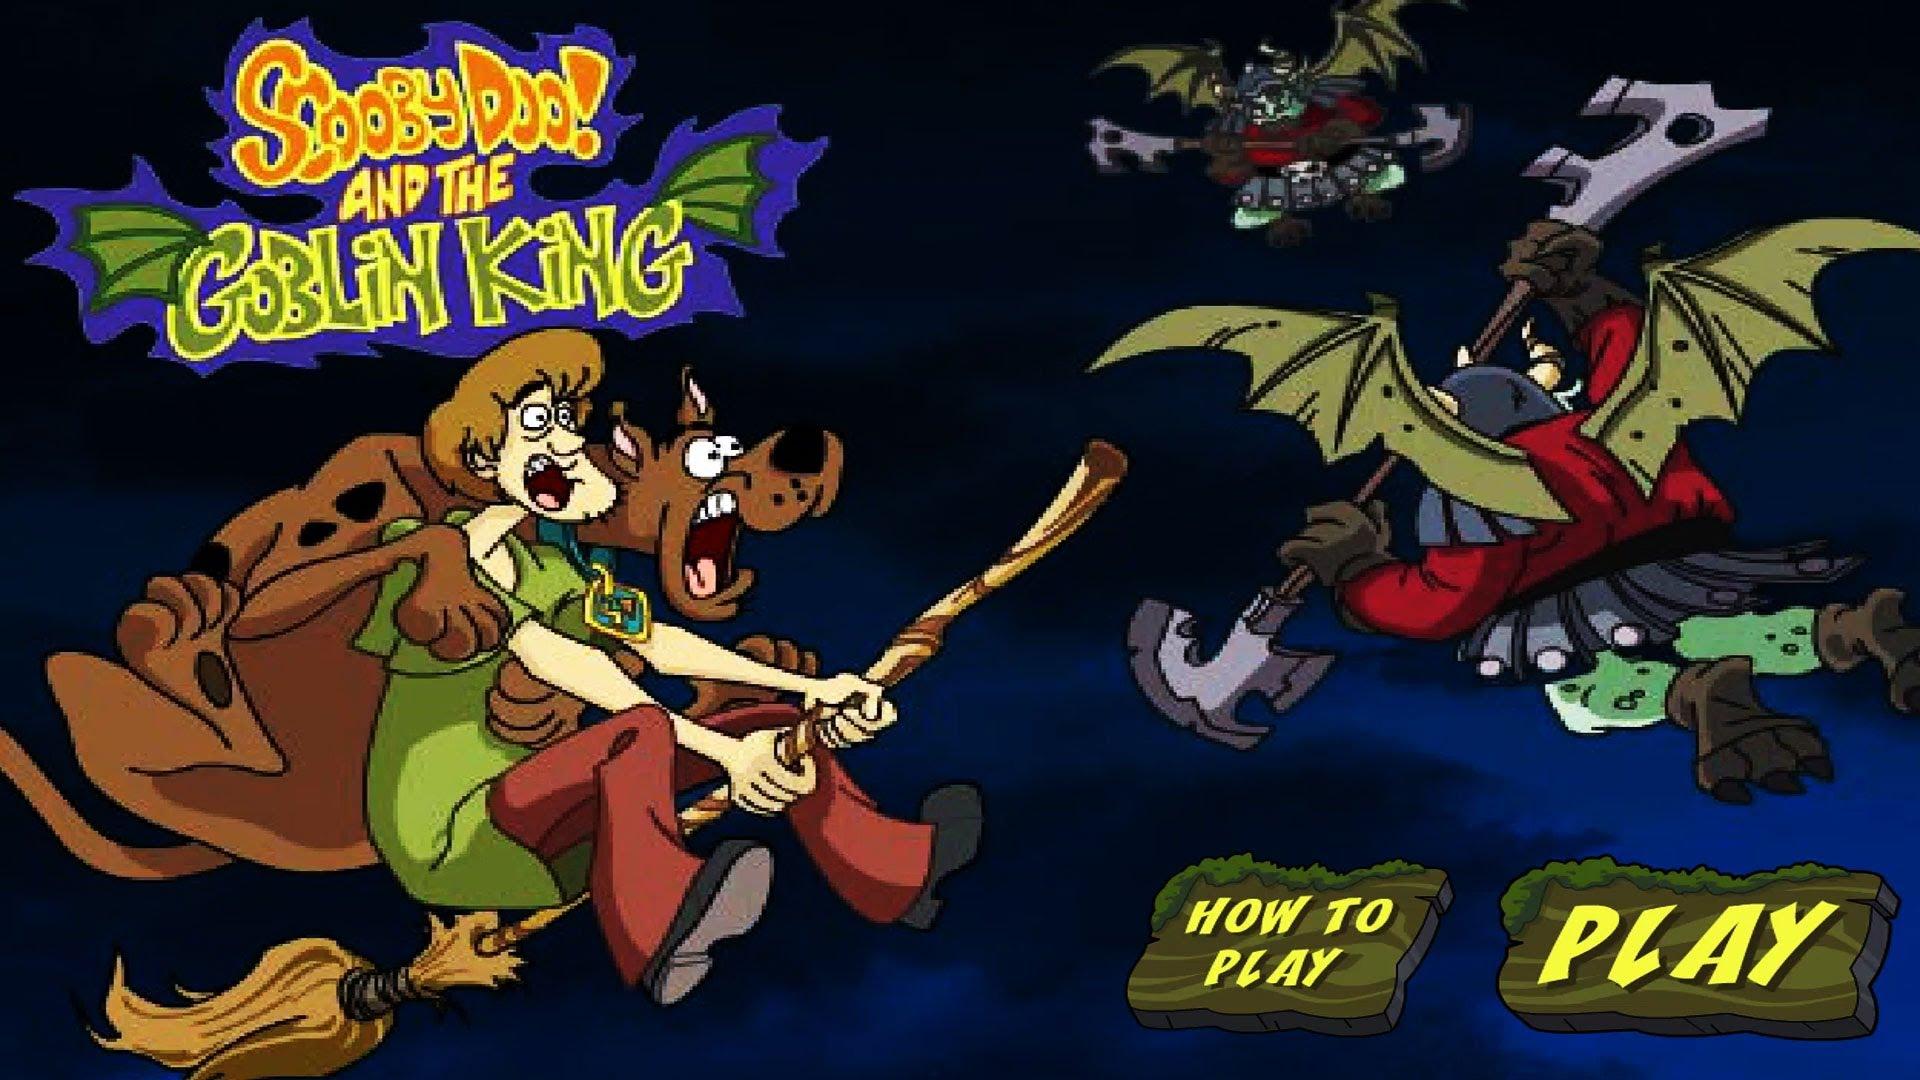 Scooby Doo And The Goblin King Wallpaper, Movie, HQ Scooby